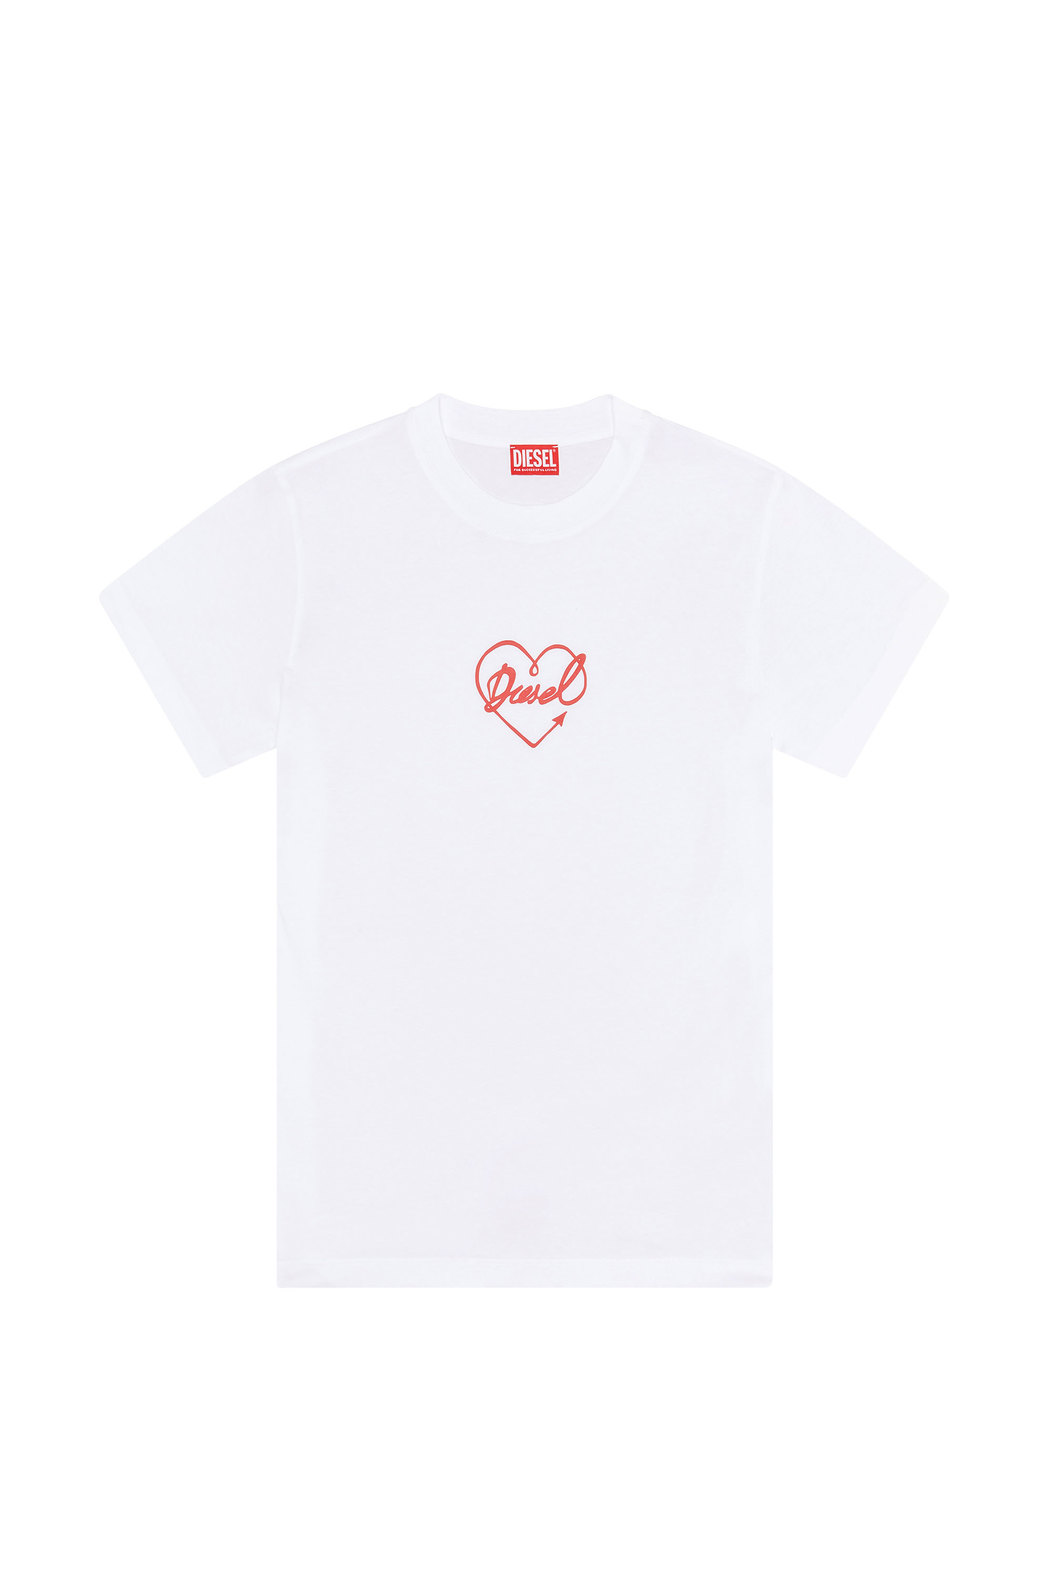 T-shirt with puffy Diesel heart print